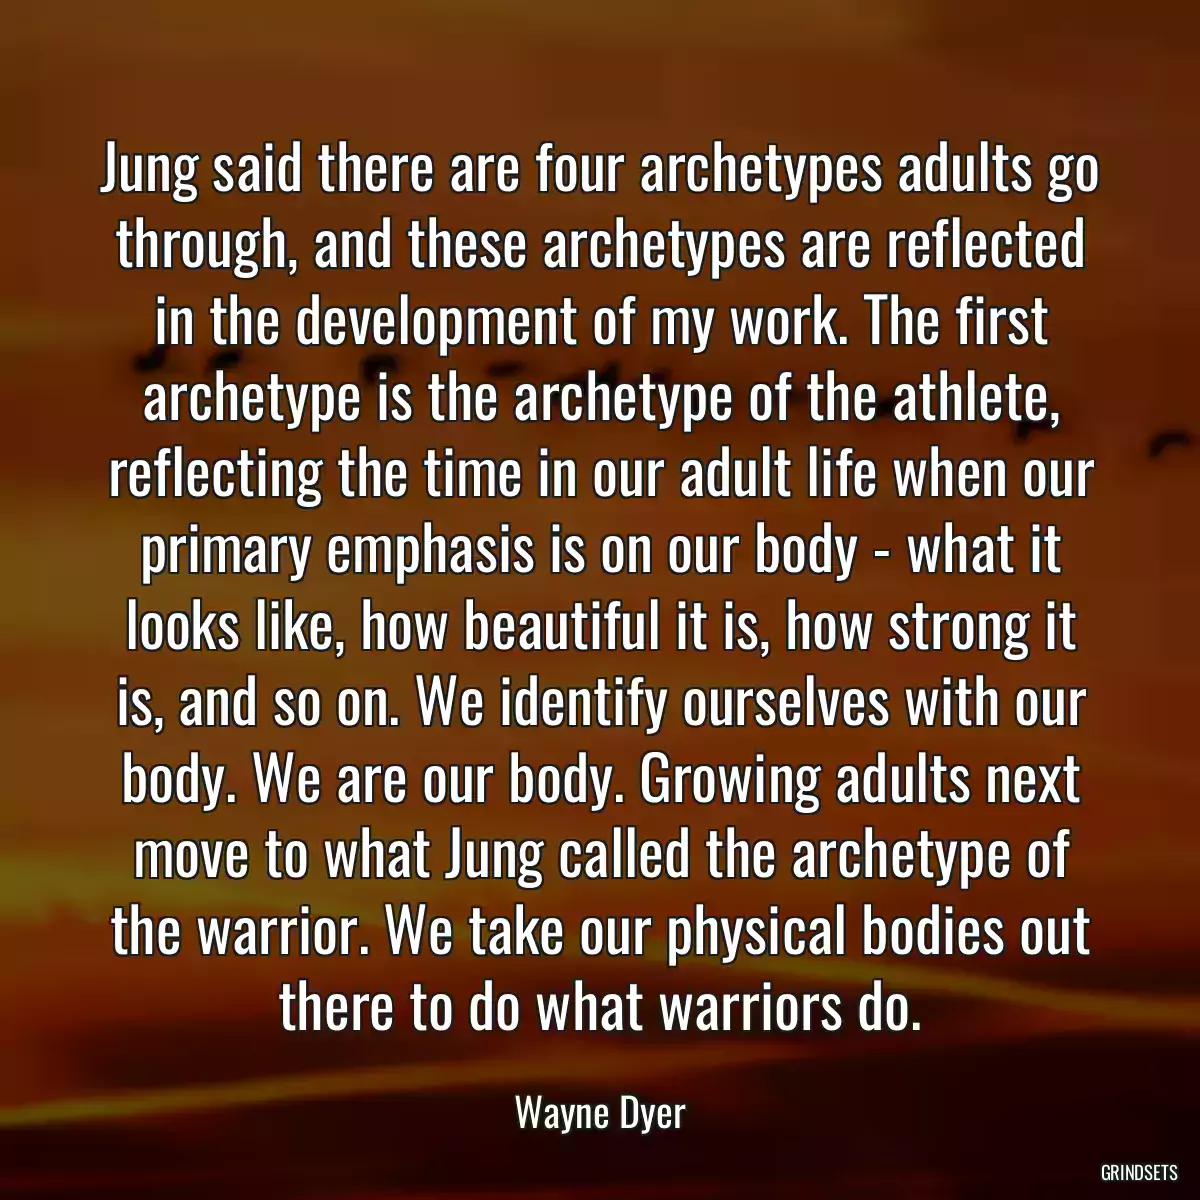 Jung said there are four archetypes adults go through, and these archetypes are reflected in the development of my work. The first archetype is the archetype of the athlete, reflecting the time in our adult life when our primary emphasis is on our body - what it looks like, how beautiful it is, how strong it is, and so on. We identify ourselves with our body. We are our body. Growing adults next move to what Jung called the archetype of the warrior. We take our physical bodies out there to do what warriors do.